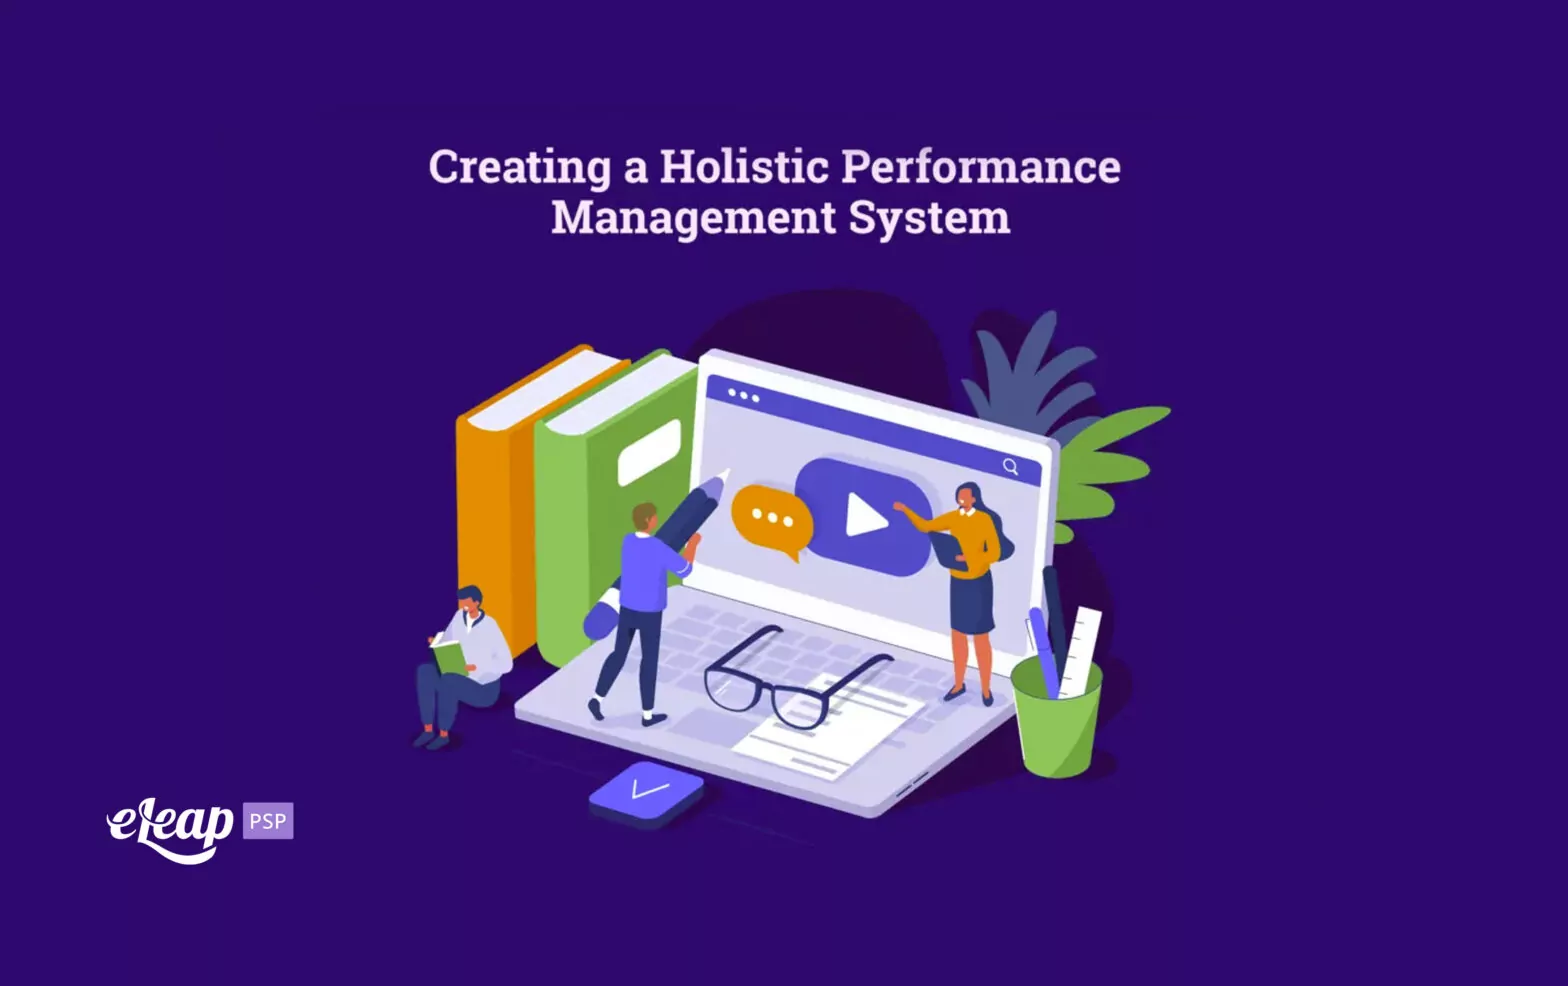 Creating a Holistic Performance Management System